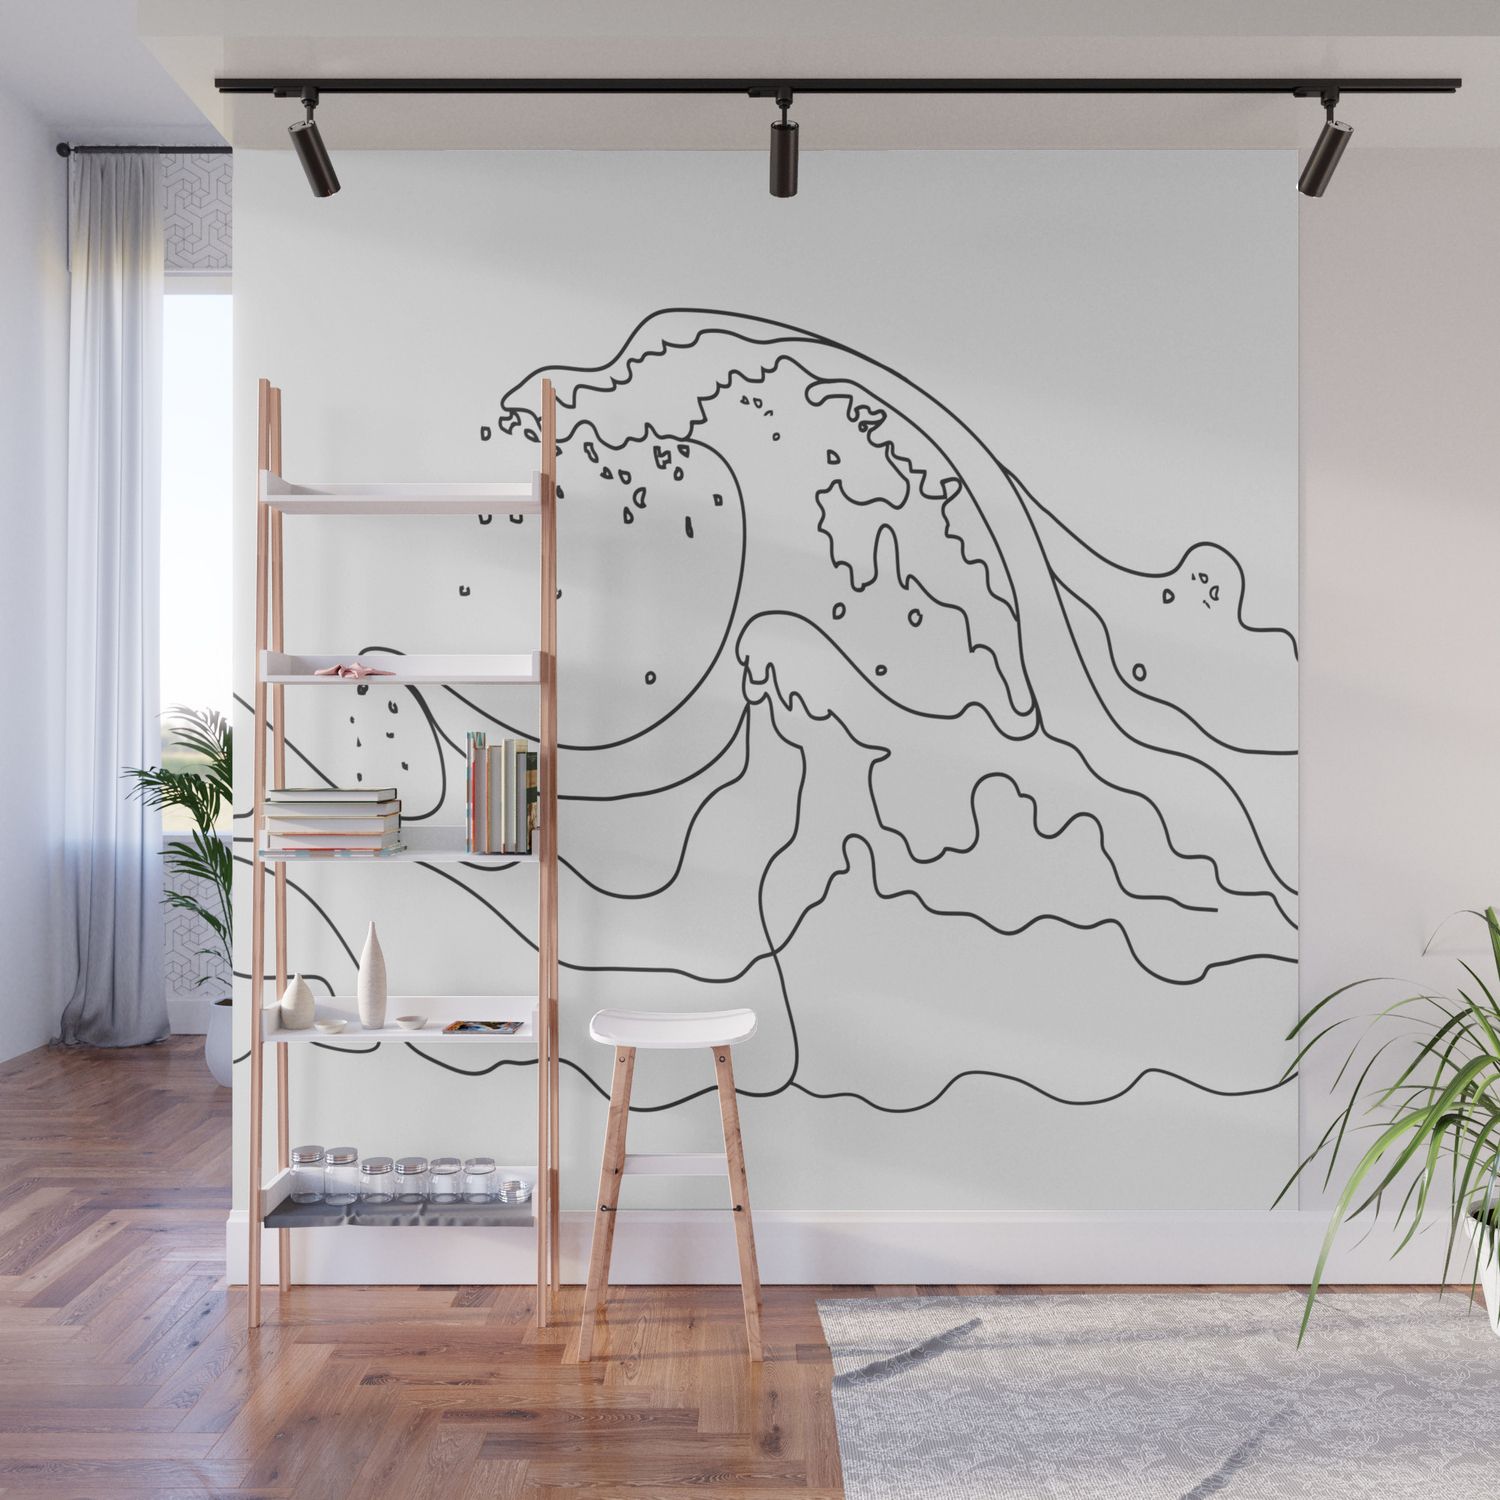 Society6 With Waves Wall Art (View 15 of 15)